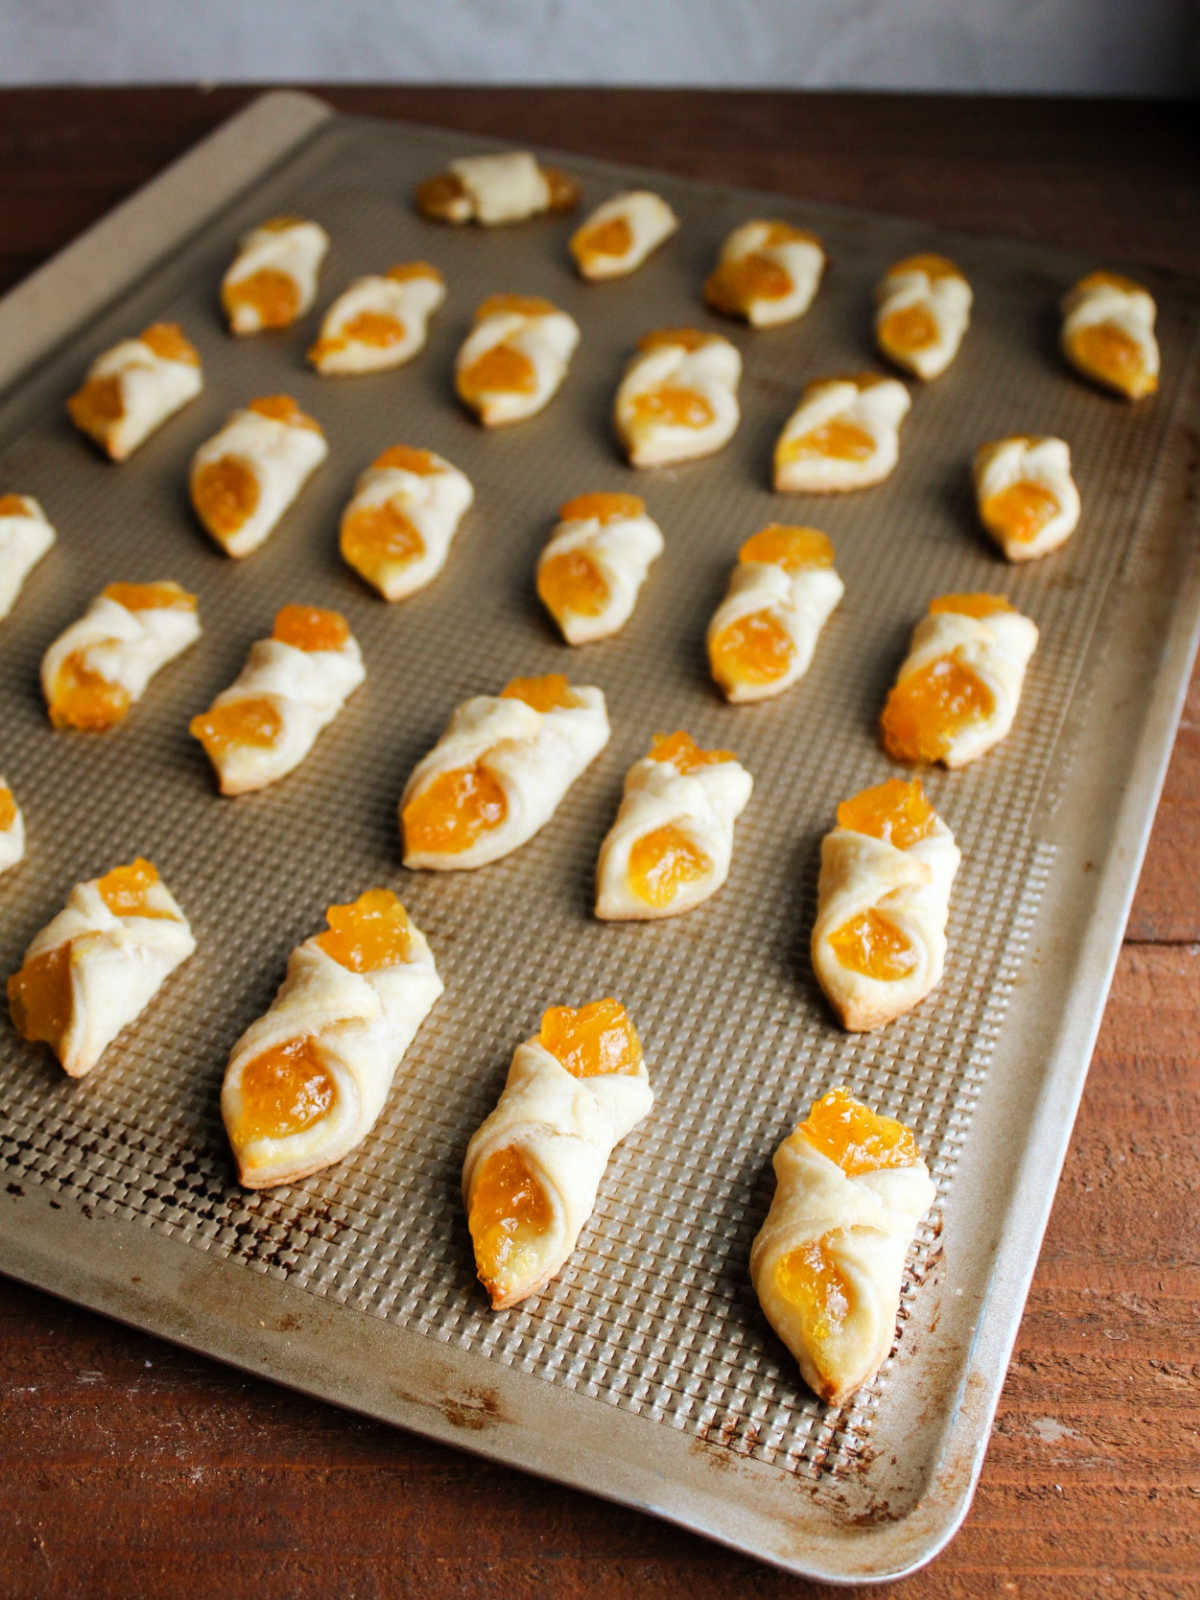 Cookie tray of freshly baked apricot kolacky cookies showing how the pastry puffed up and the filling set.